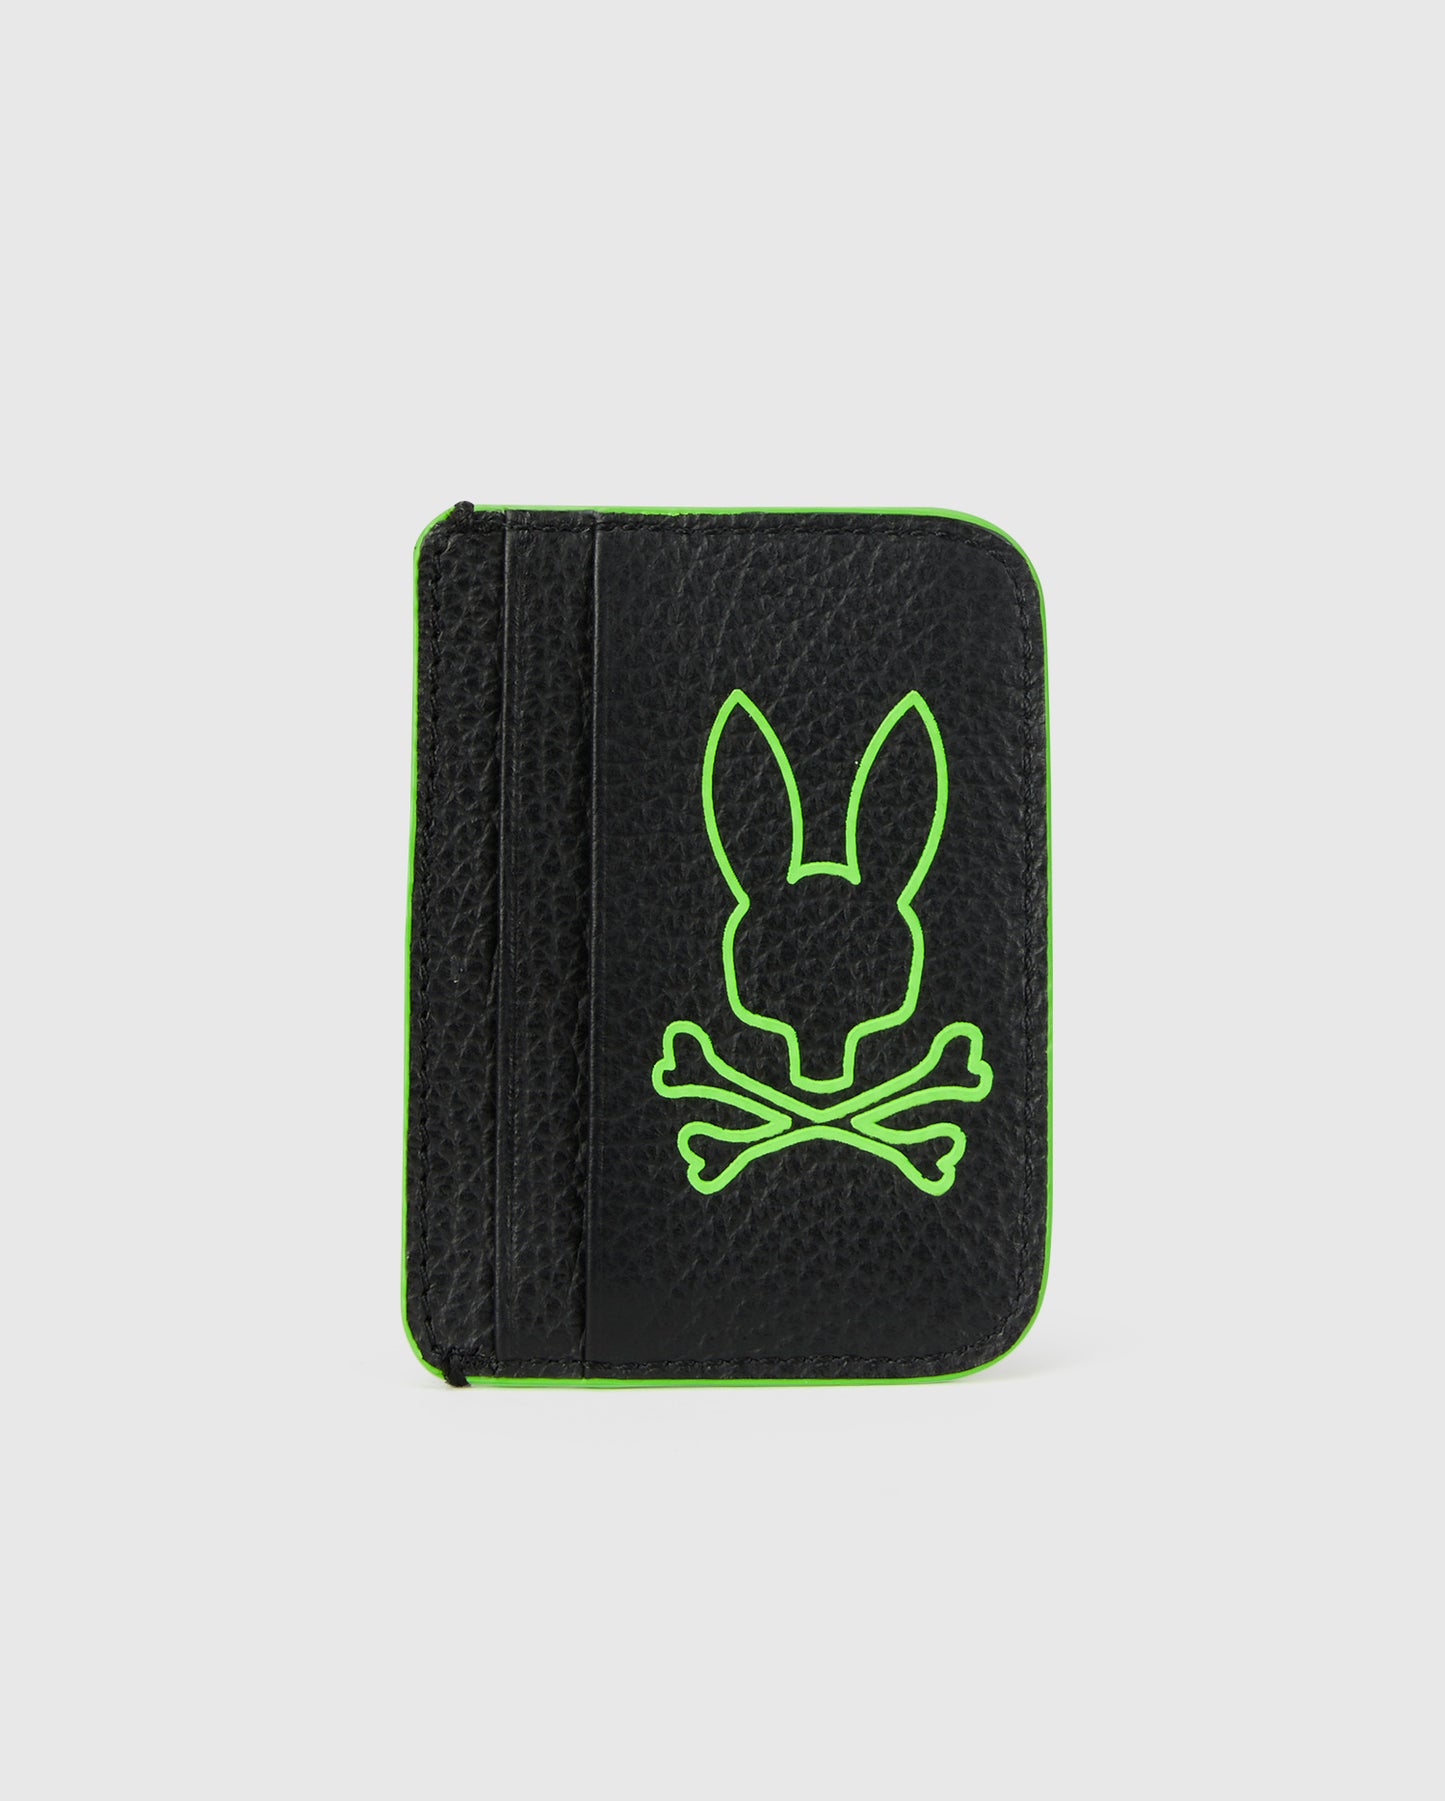 Psycho Bunny Billfold Leather Wallet - Black | NYCMode